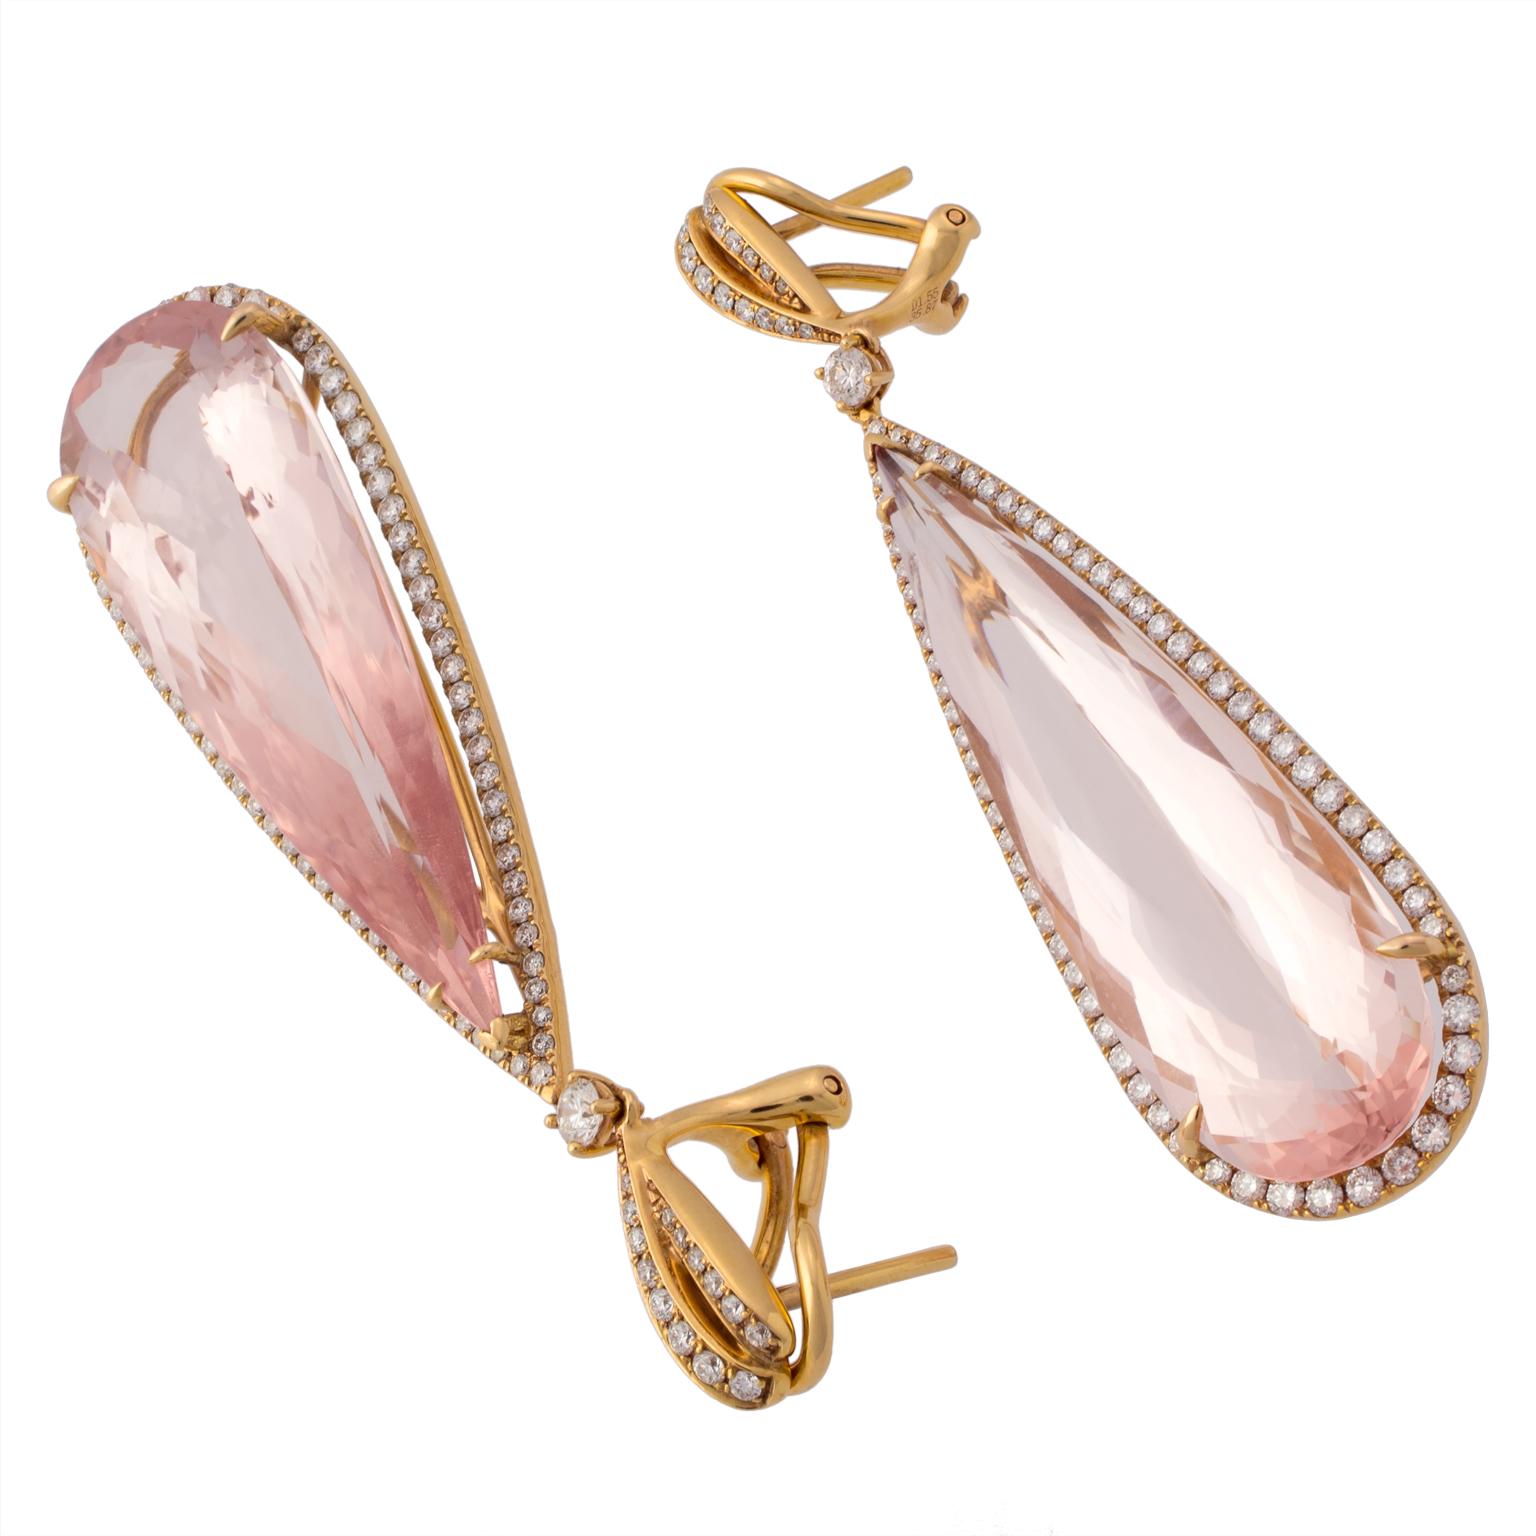 Rose gold earrings from Suárez, with central pear cut morganites with a total weigth of 35.87 carats, surrounded by 0.55 carats in round brilliant cut diamonds.
Length 6 cm (2.36 in)